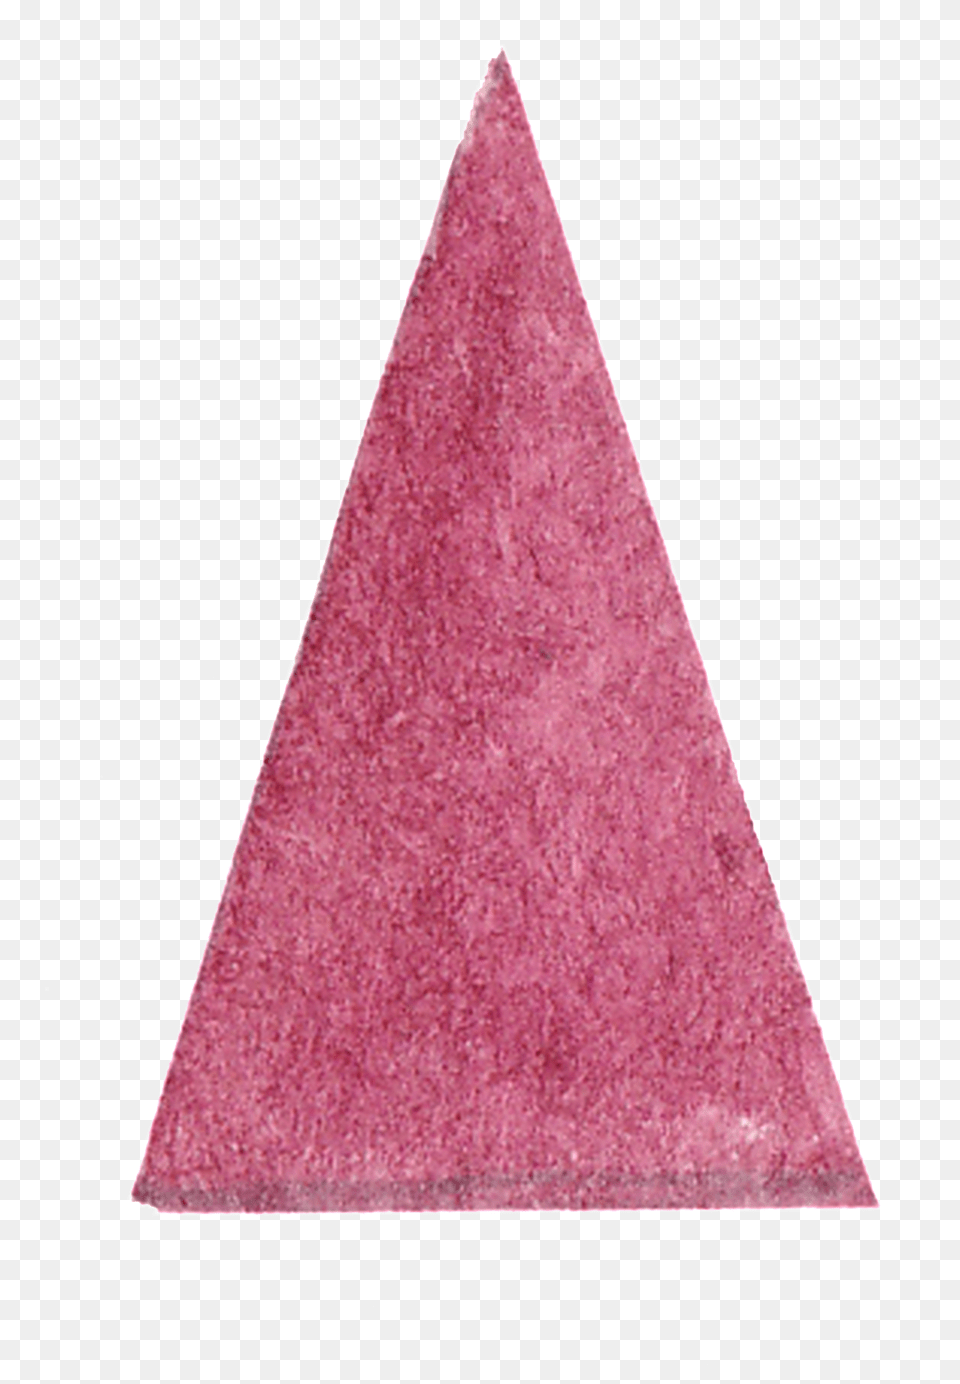 This Graphics Is Pink Triangle Decorative Triangle Png Image